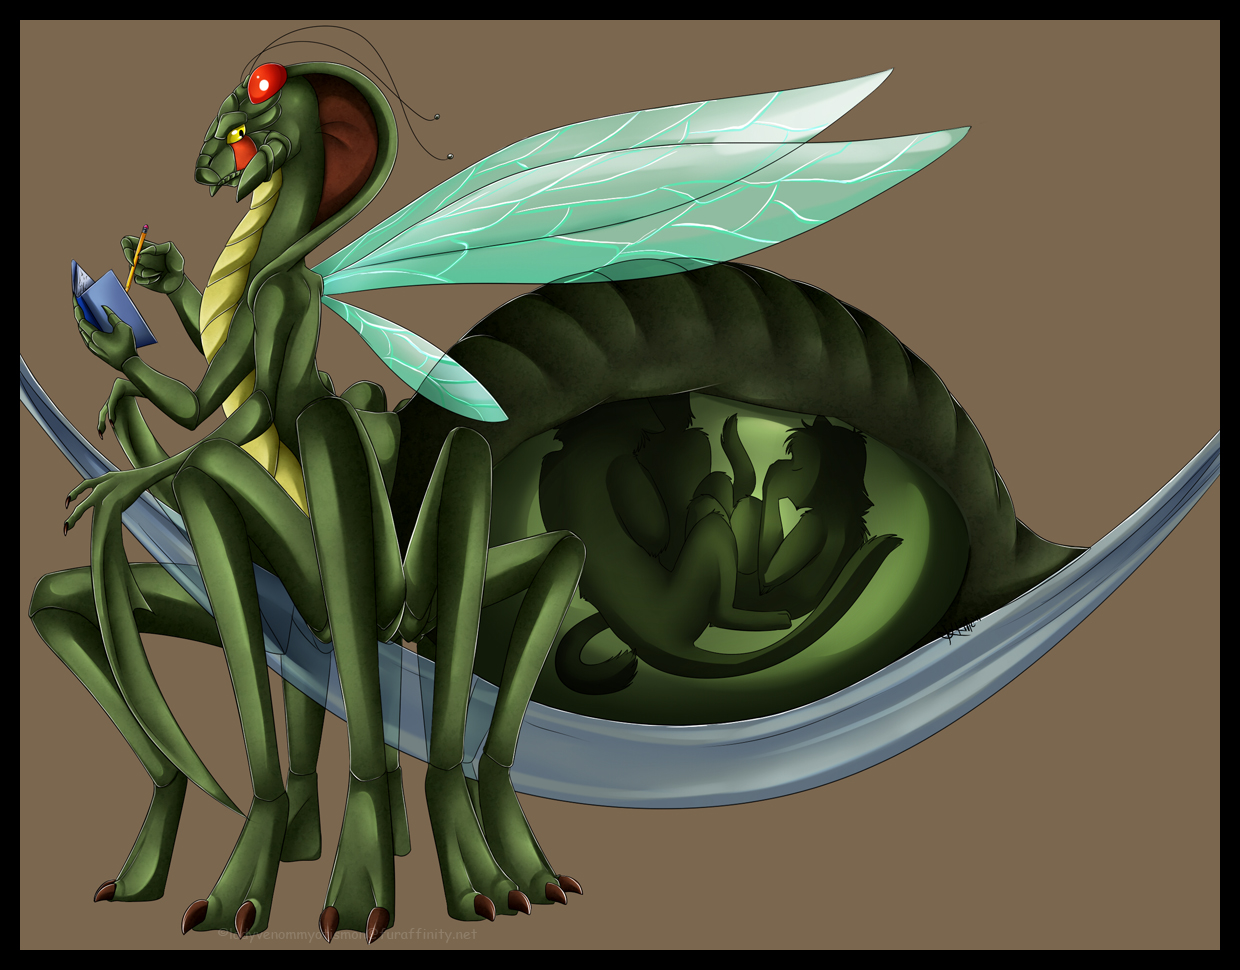 Insect vore